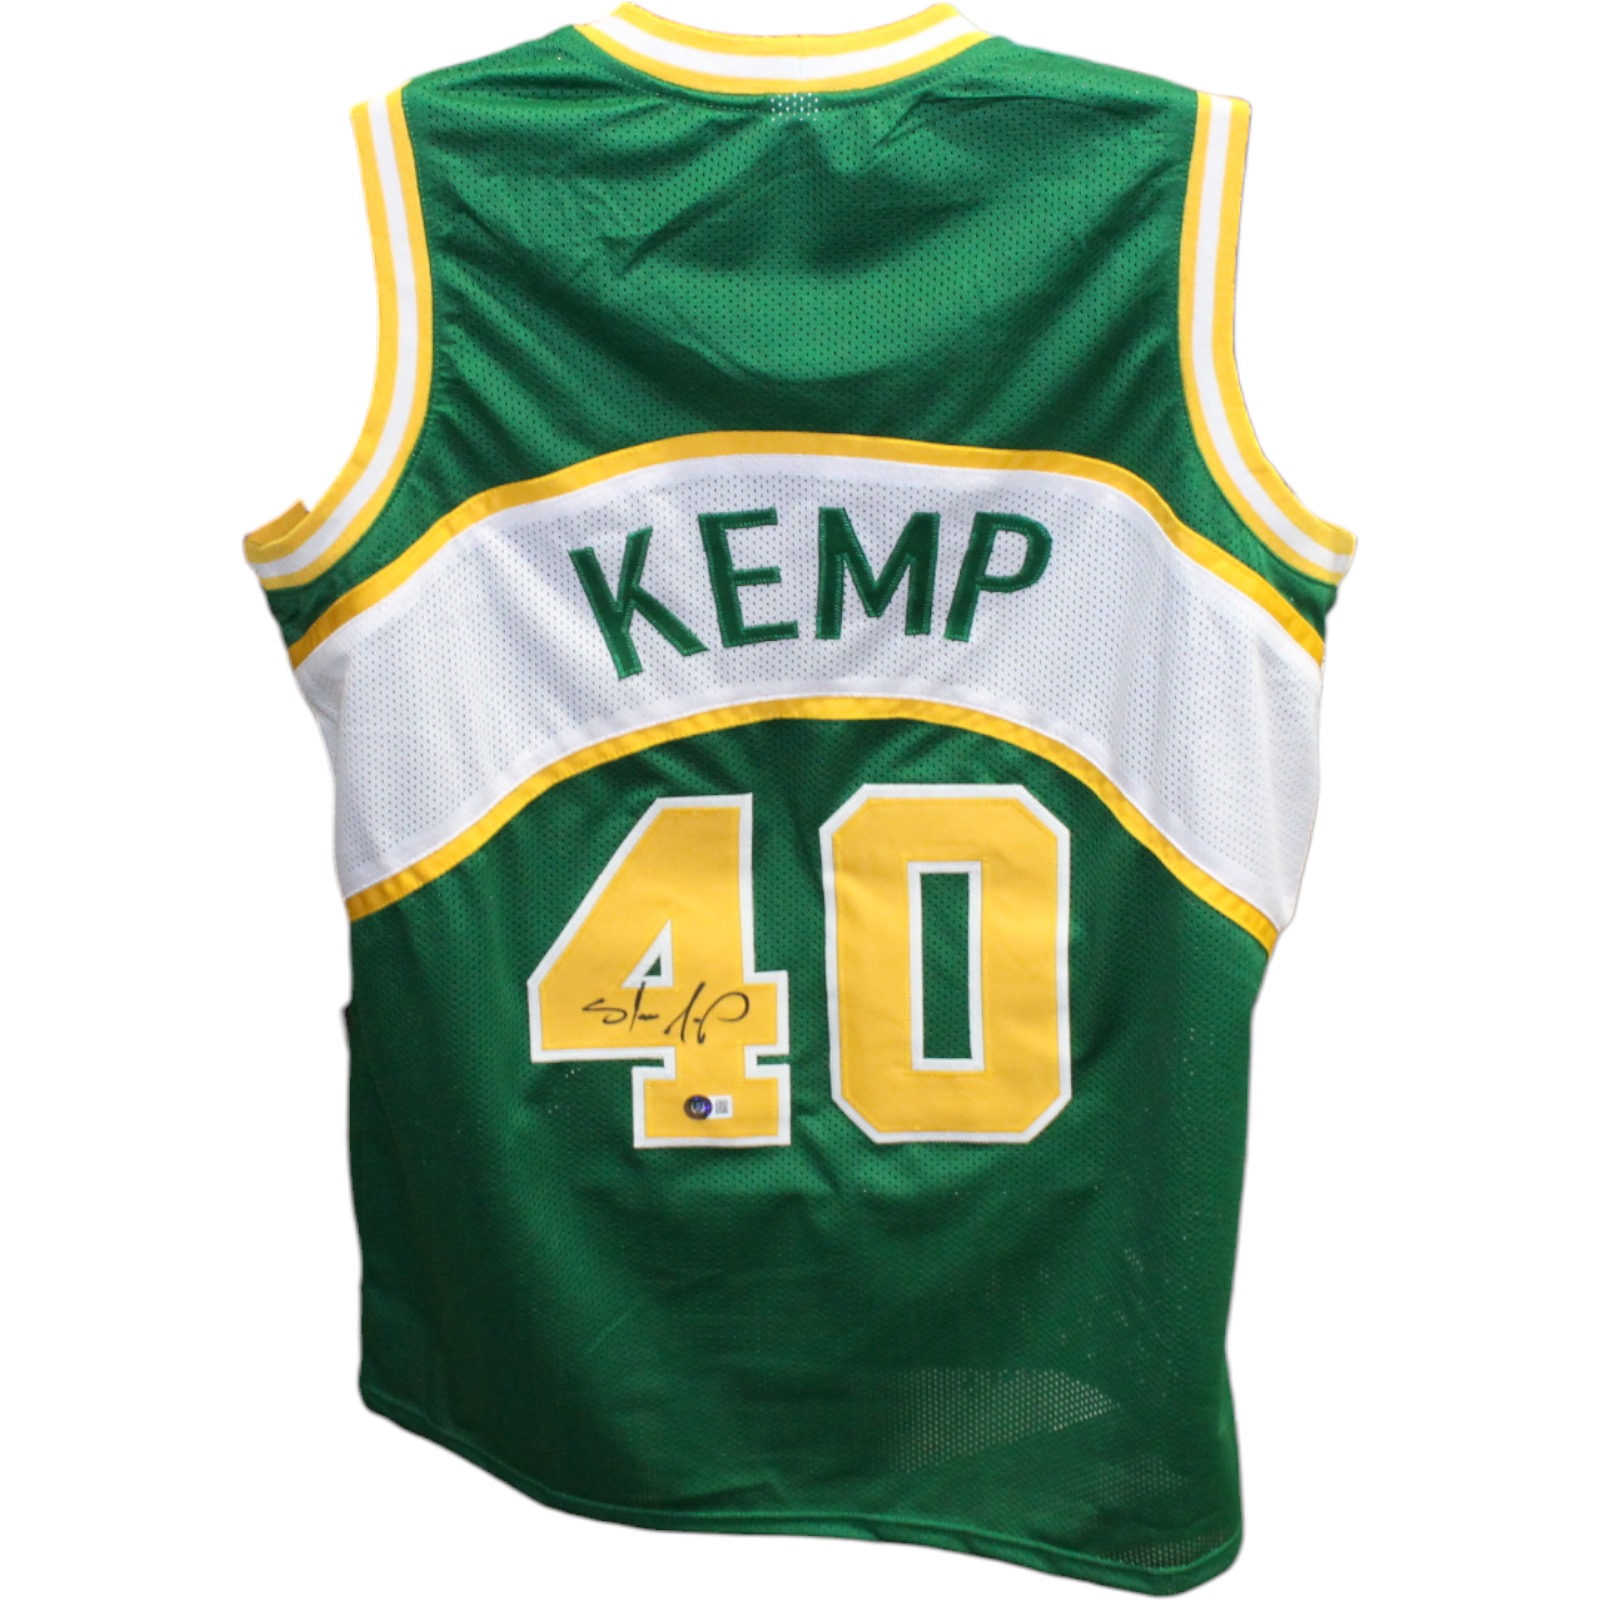 Shawn Kemp Autographed/Signed Pro Style Jersey Green Beckett